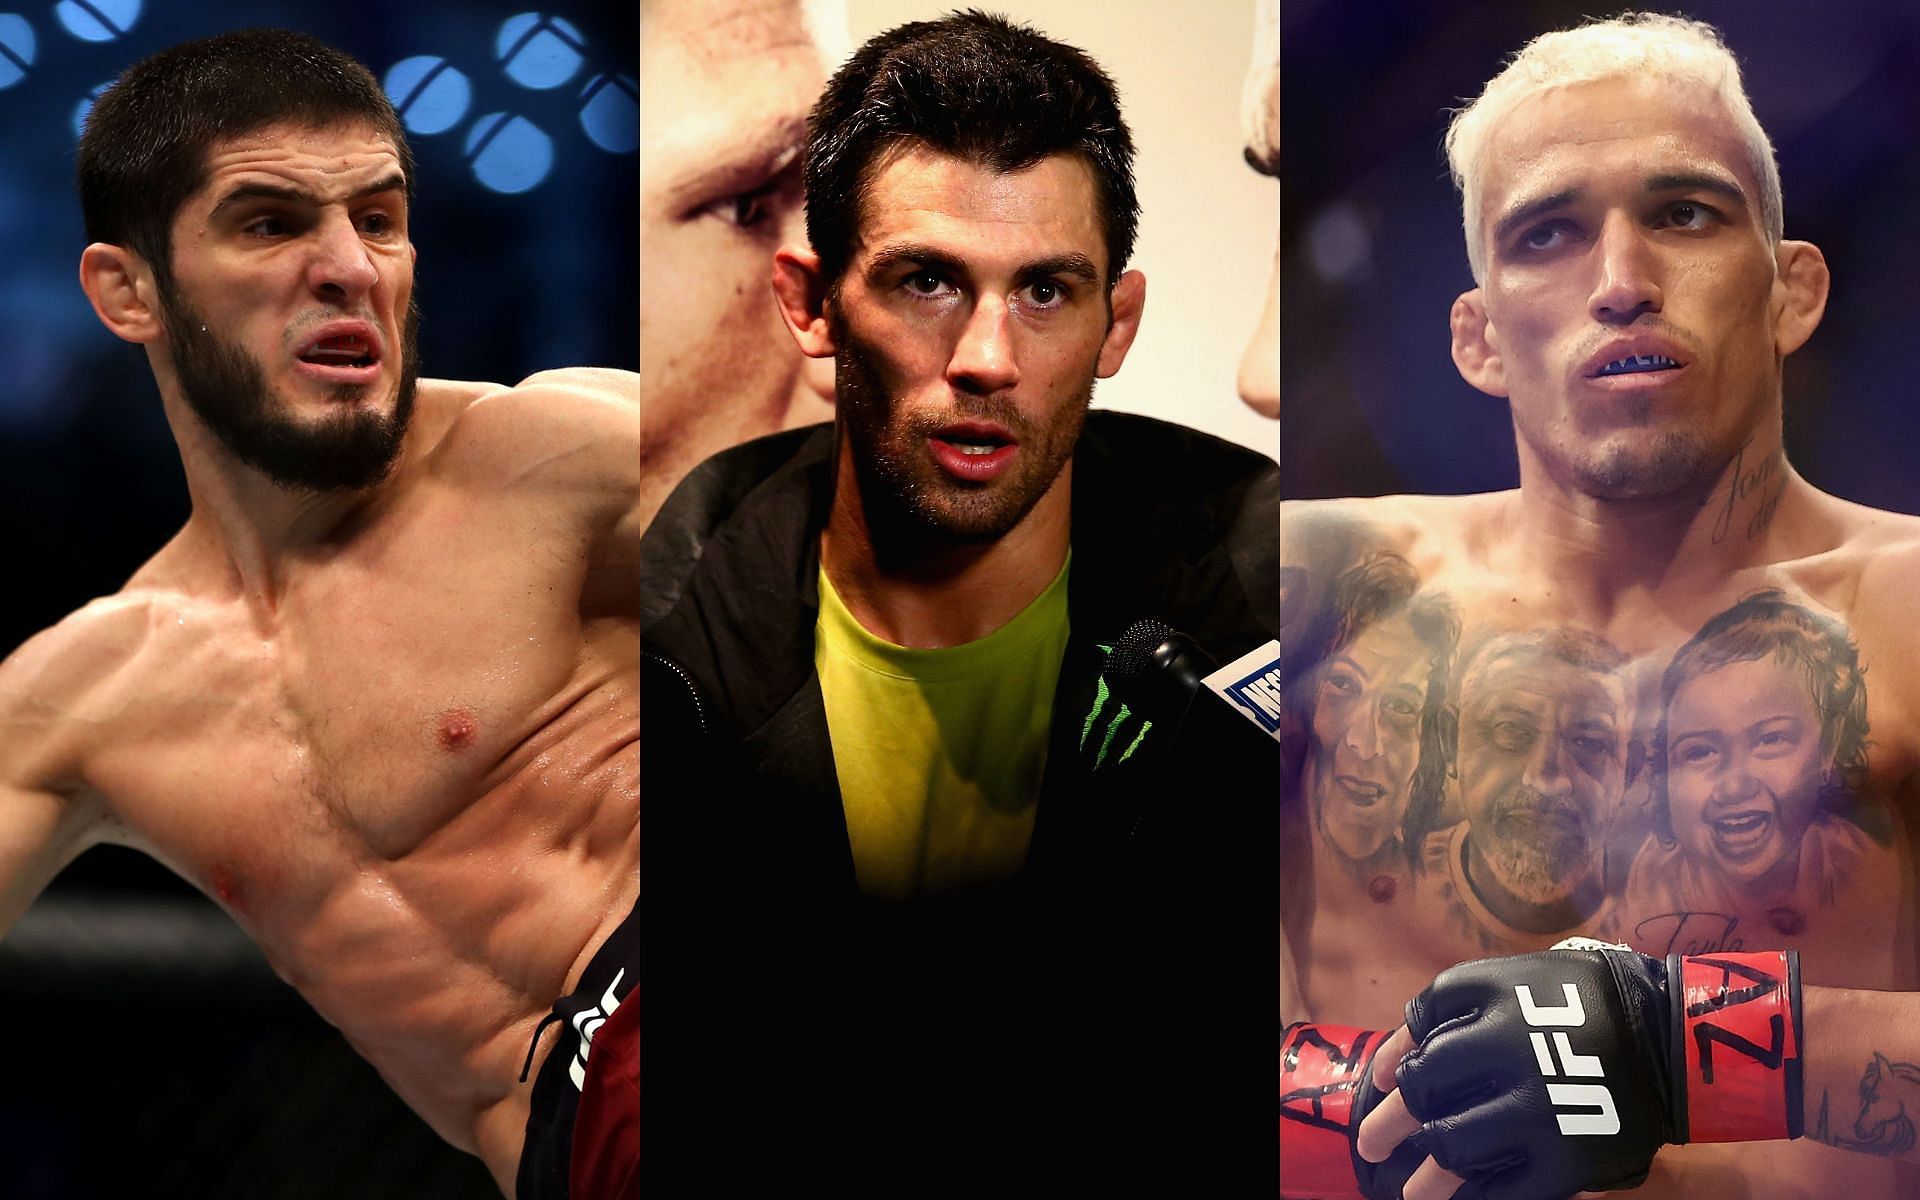 Islam Makhachev (left), Dominick Cruz (center), and Charles Oliveira (right) (Images via Getty)